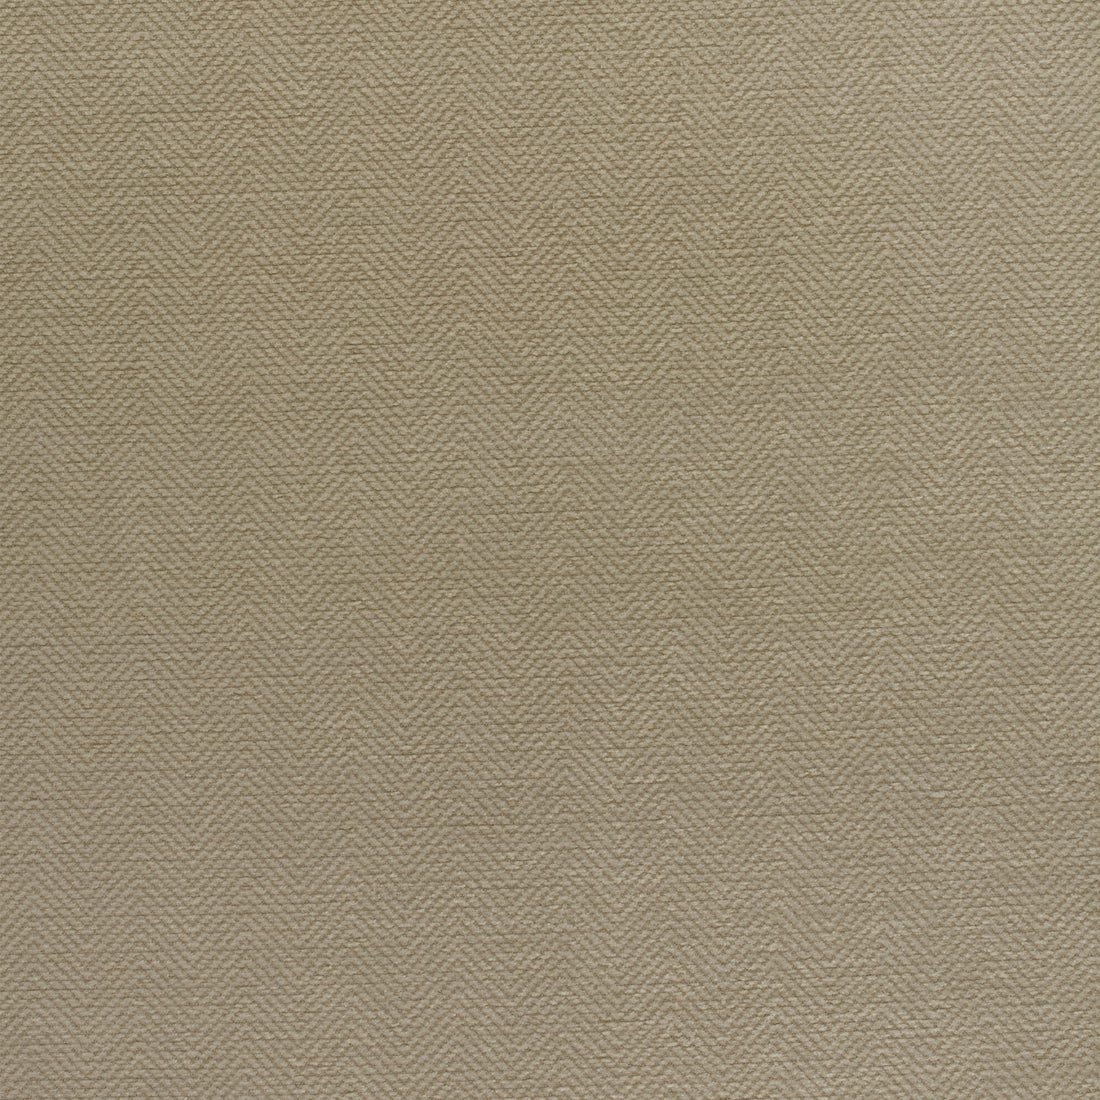 Bronwyn Herringbone fabric in tea color - pattern number W80683 - by Thibaut in the Pinnacle collection